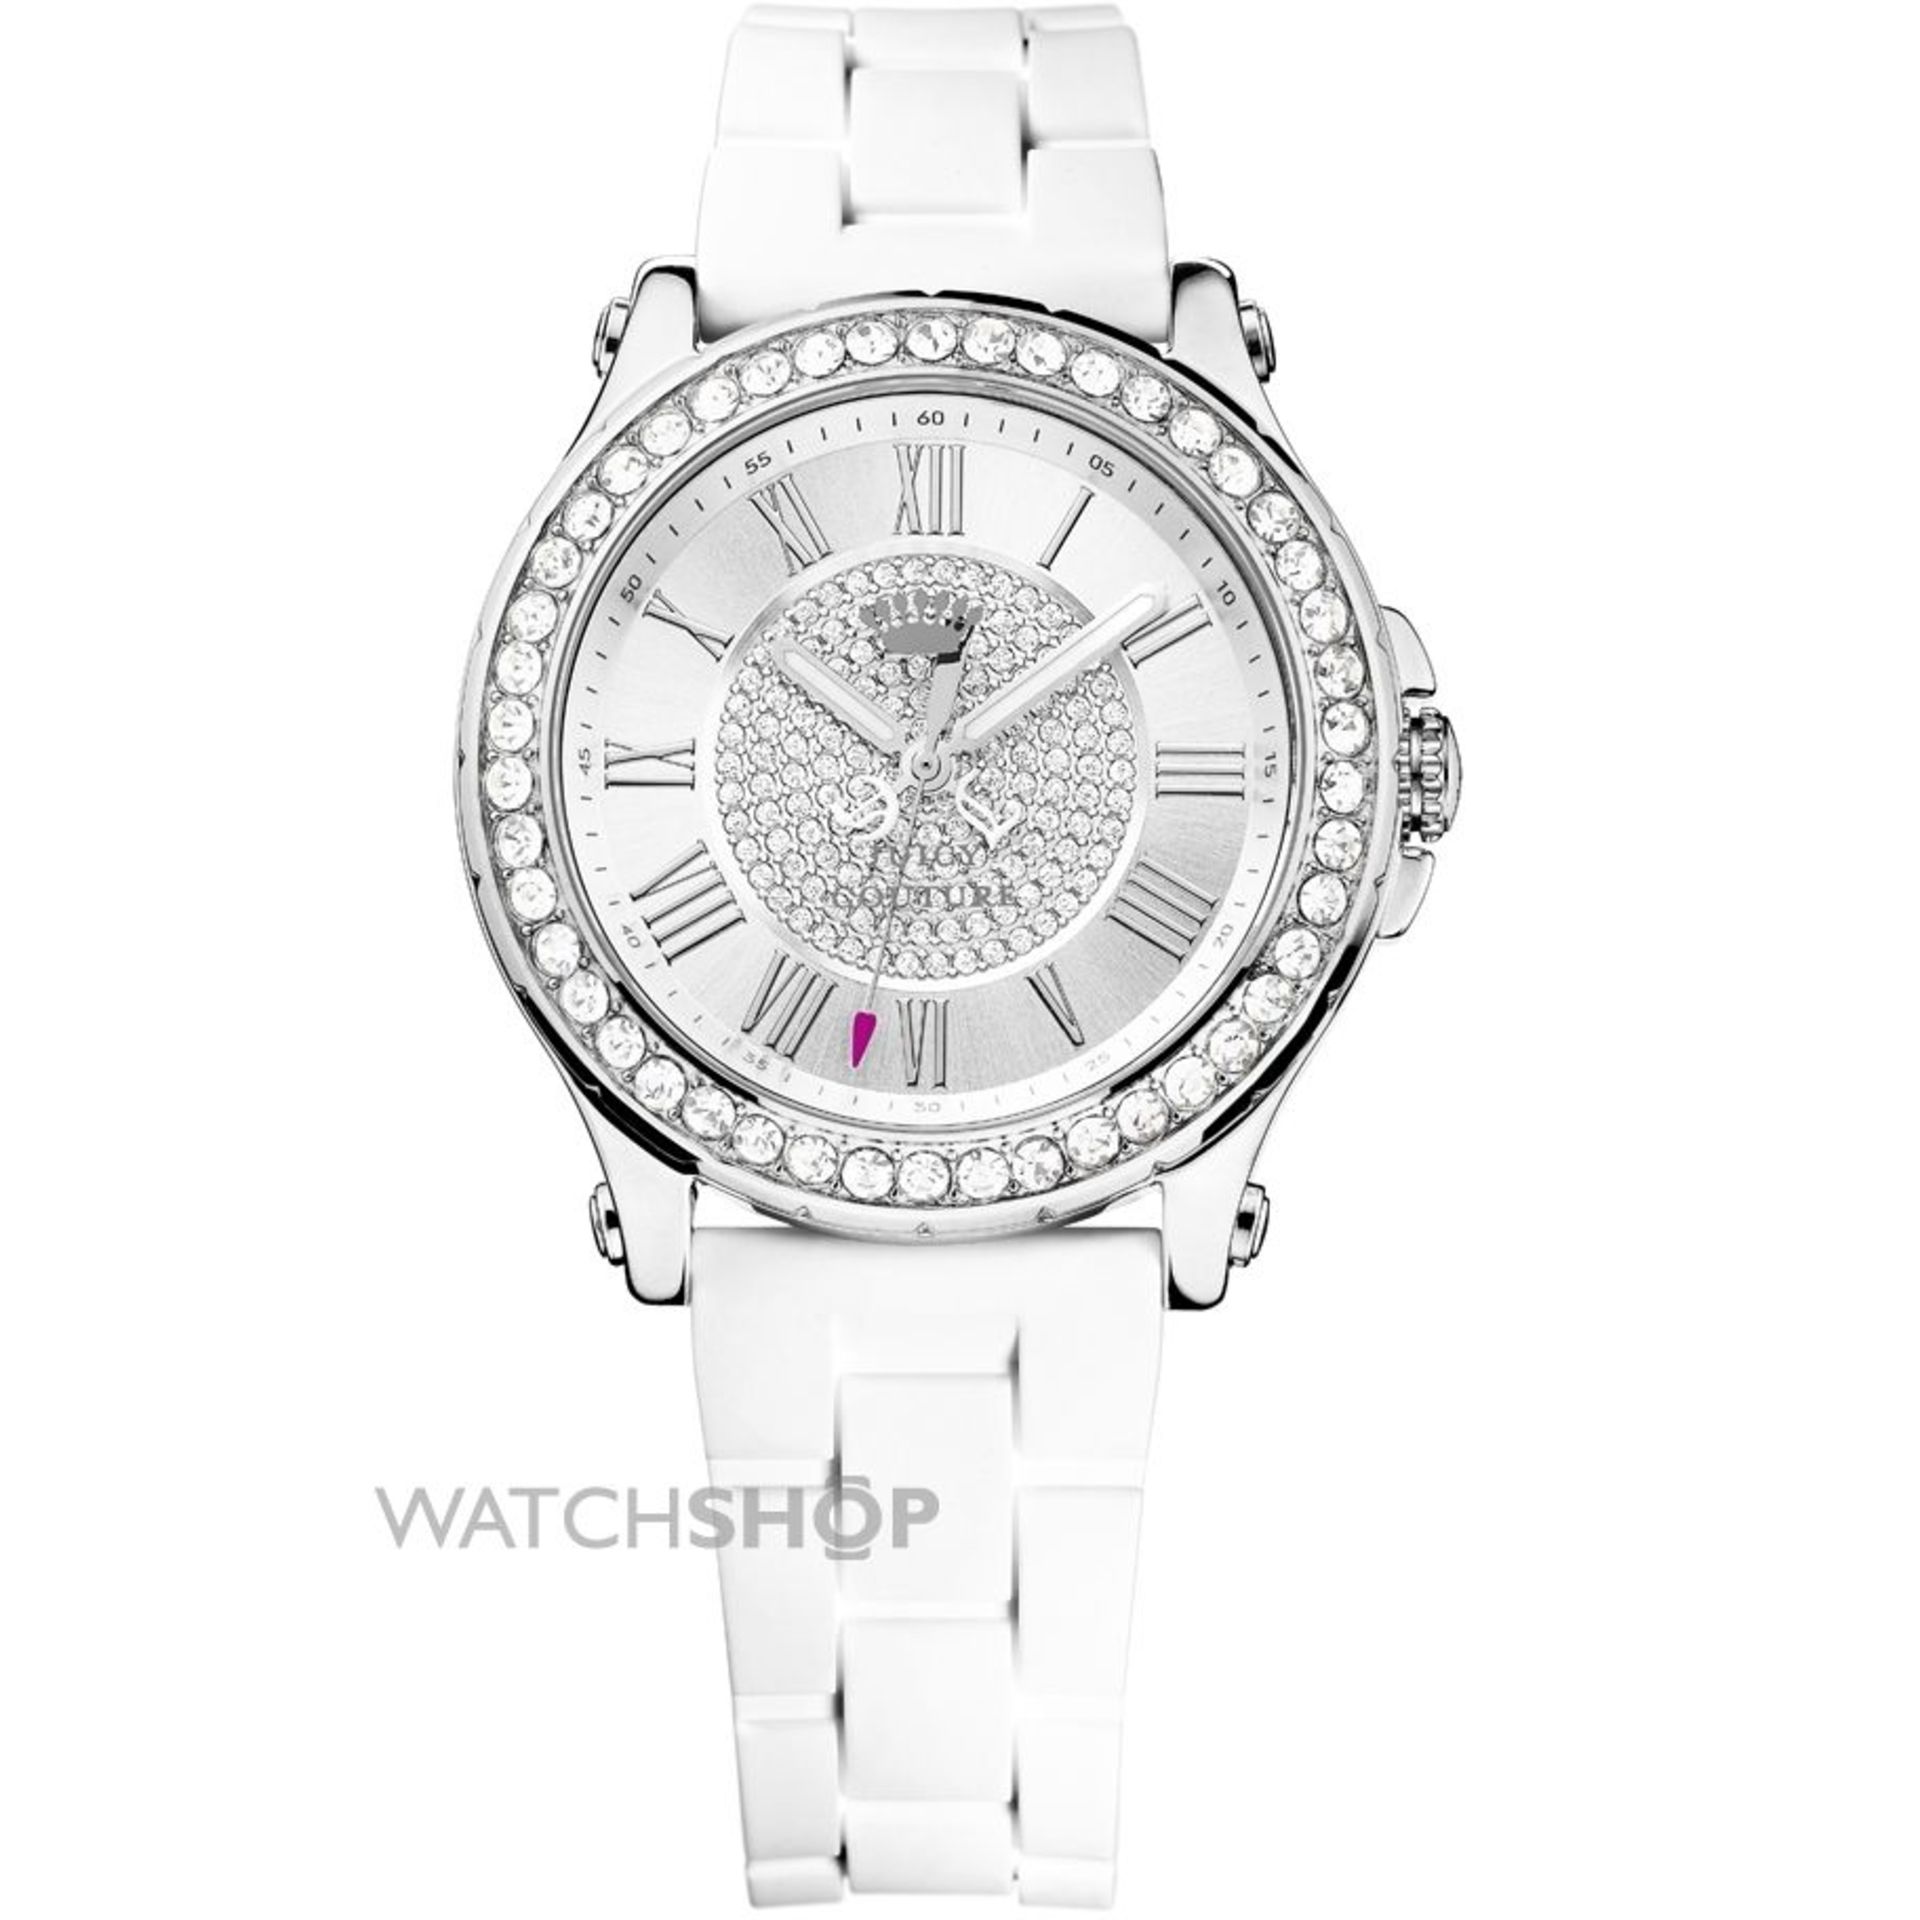 BRAND NEW JUICY COUTURE LADIES WRIST WATCH WITH 2 YEARS INTERNATIONAL WARRANTY (1901051)